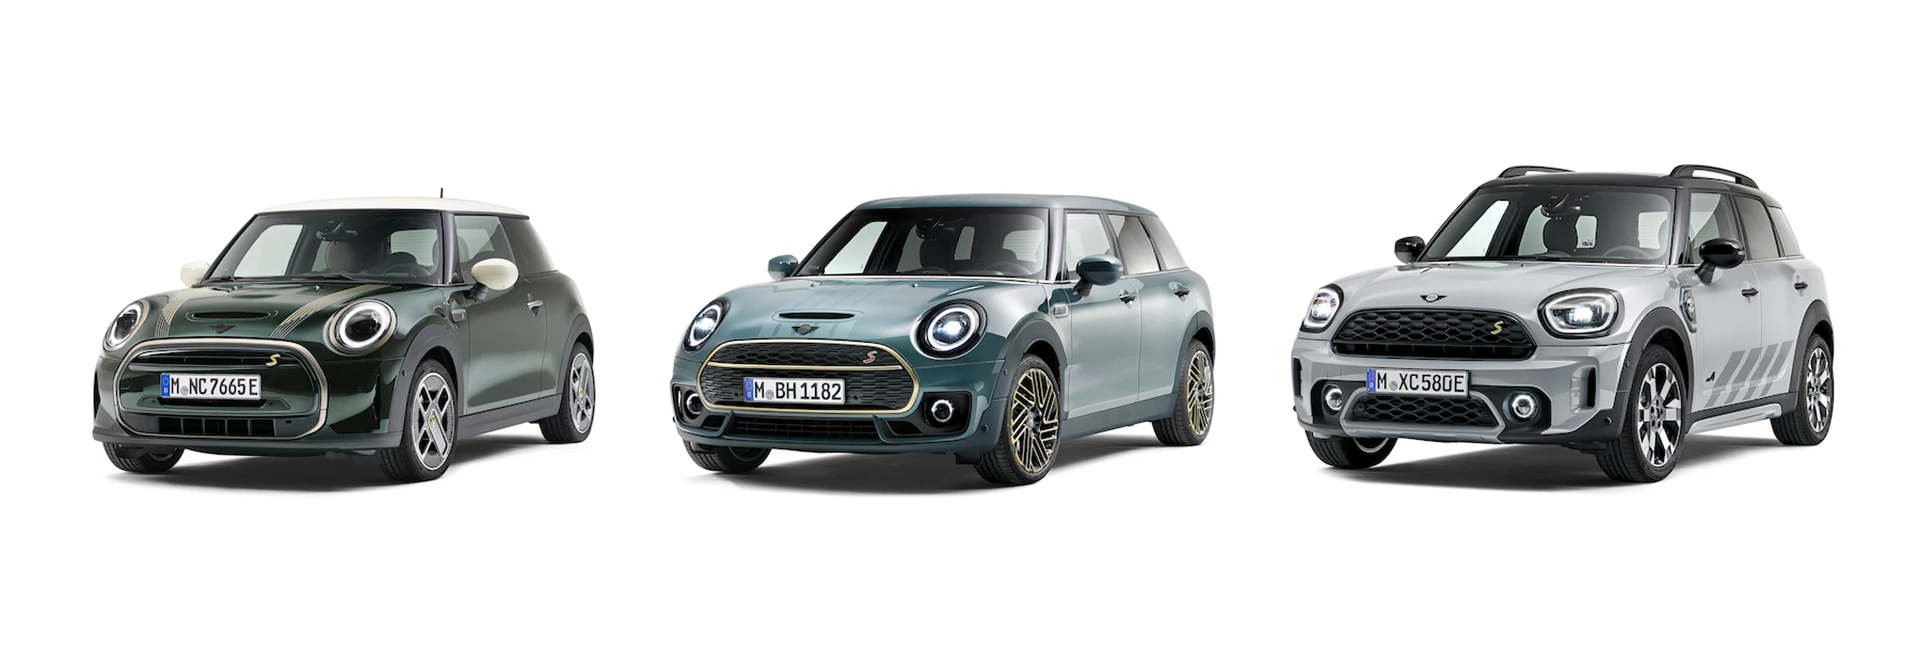 New Mini special editions: Here’s what you need to know 